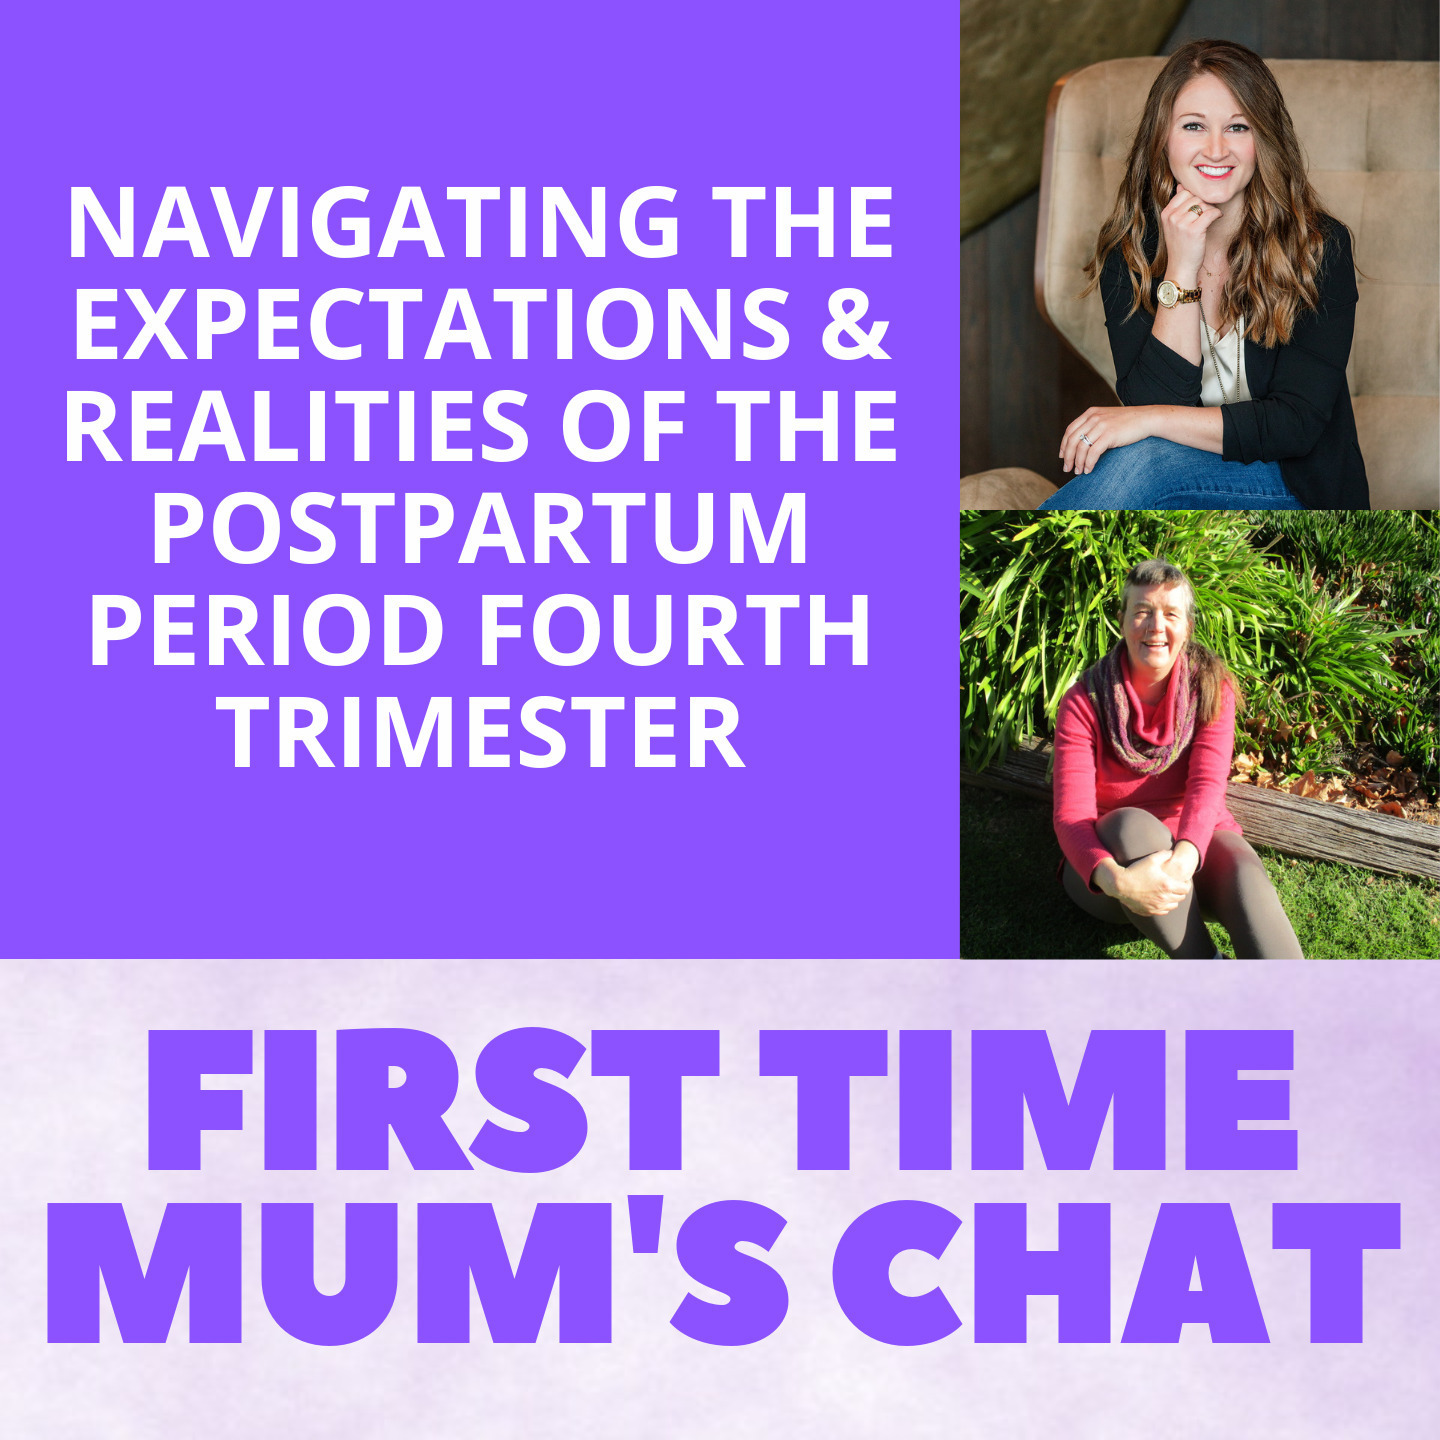 Navigating the Expectations & Realities of the Postpartum Period Fourth Trimester